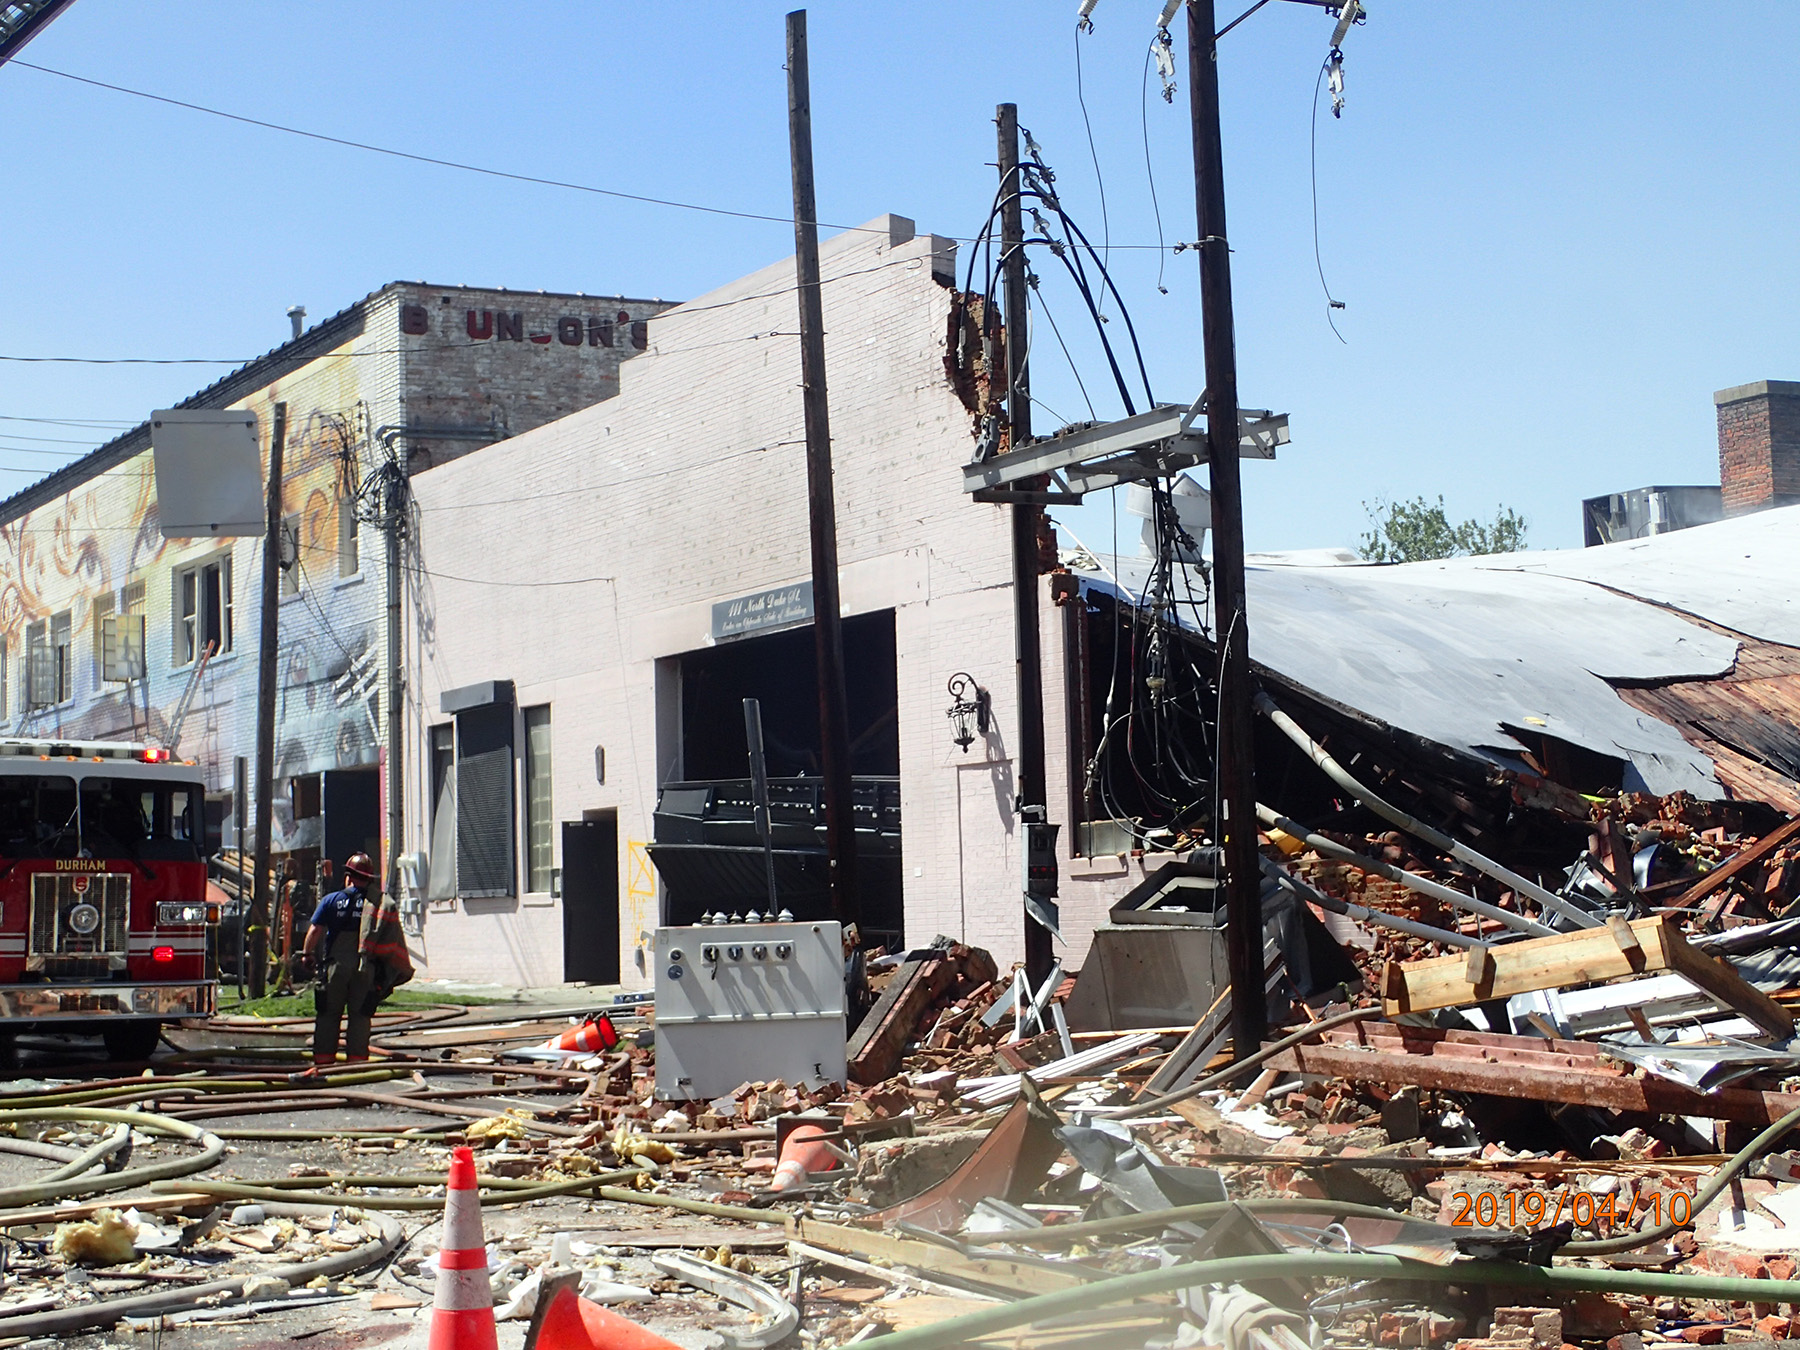 partially destroyed building with lots of debris, damaged utility poles. two firemen are seen in the background